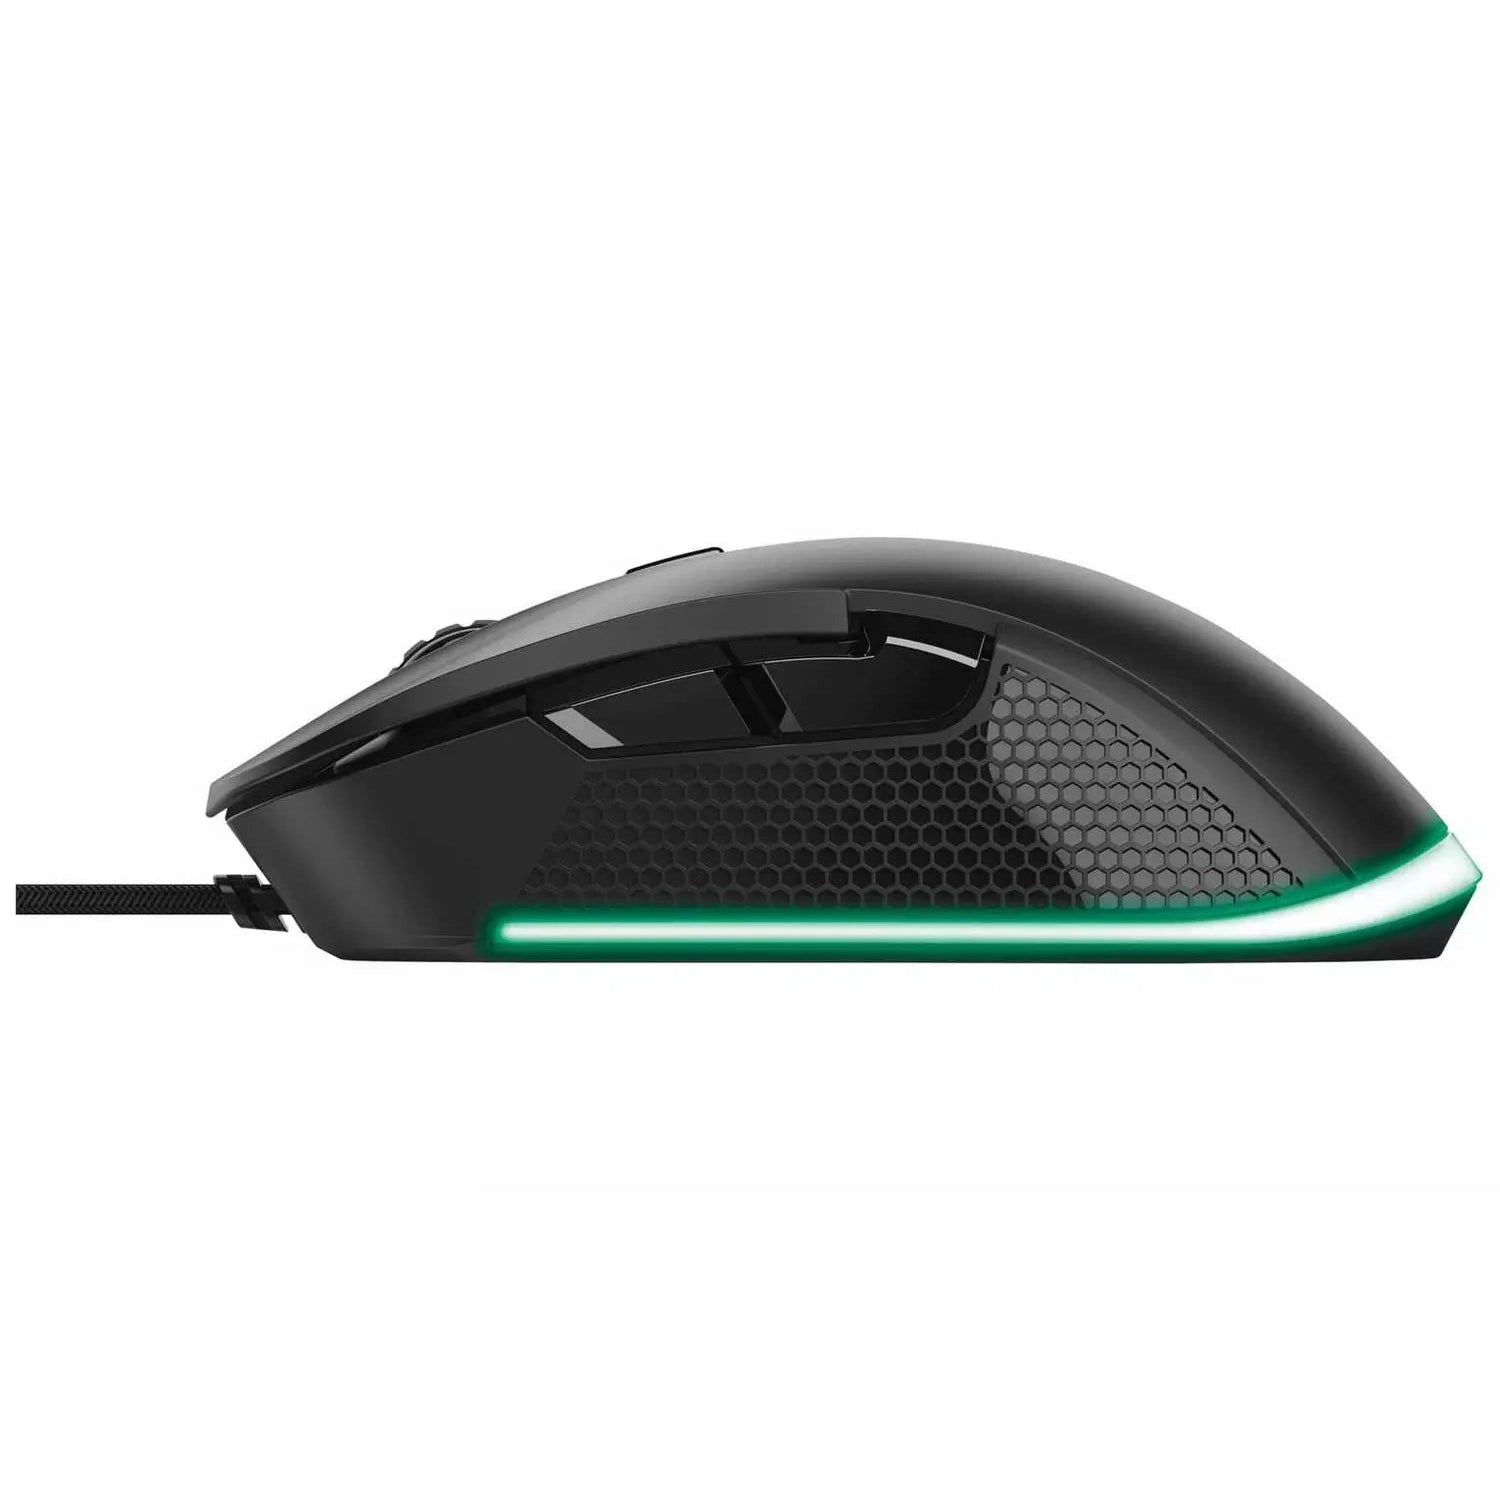 Trust Ybar GXT922 Wired Gaming Mouse - Black